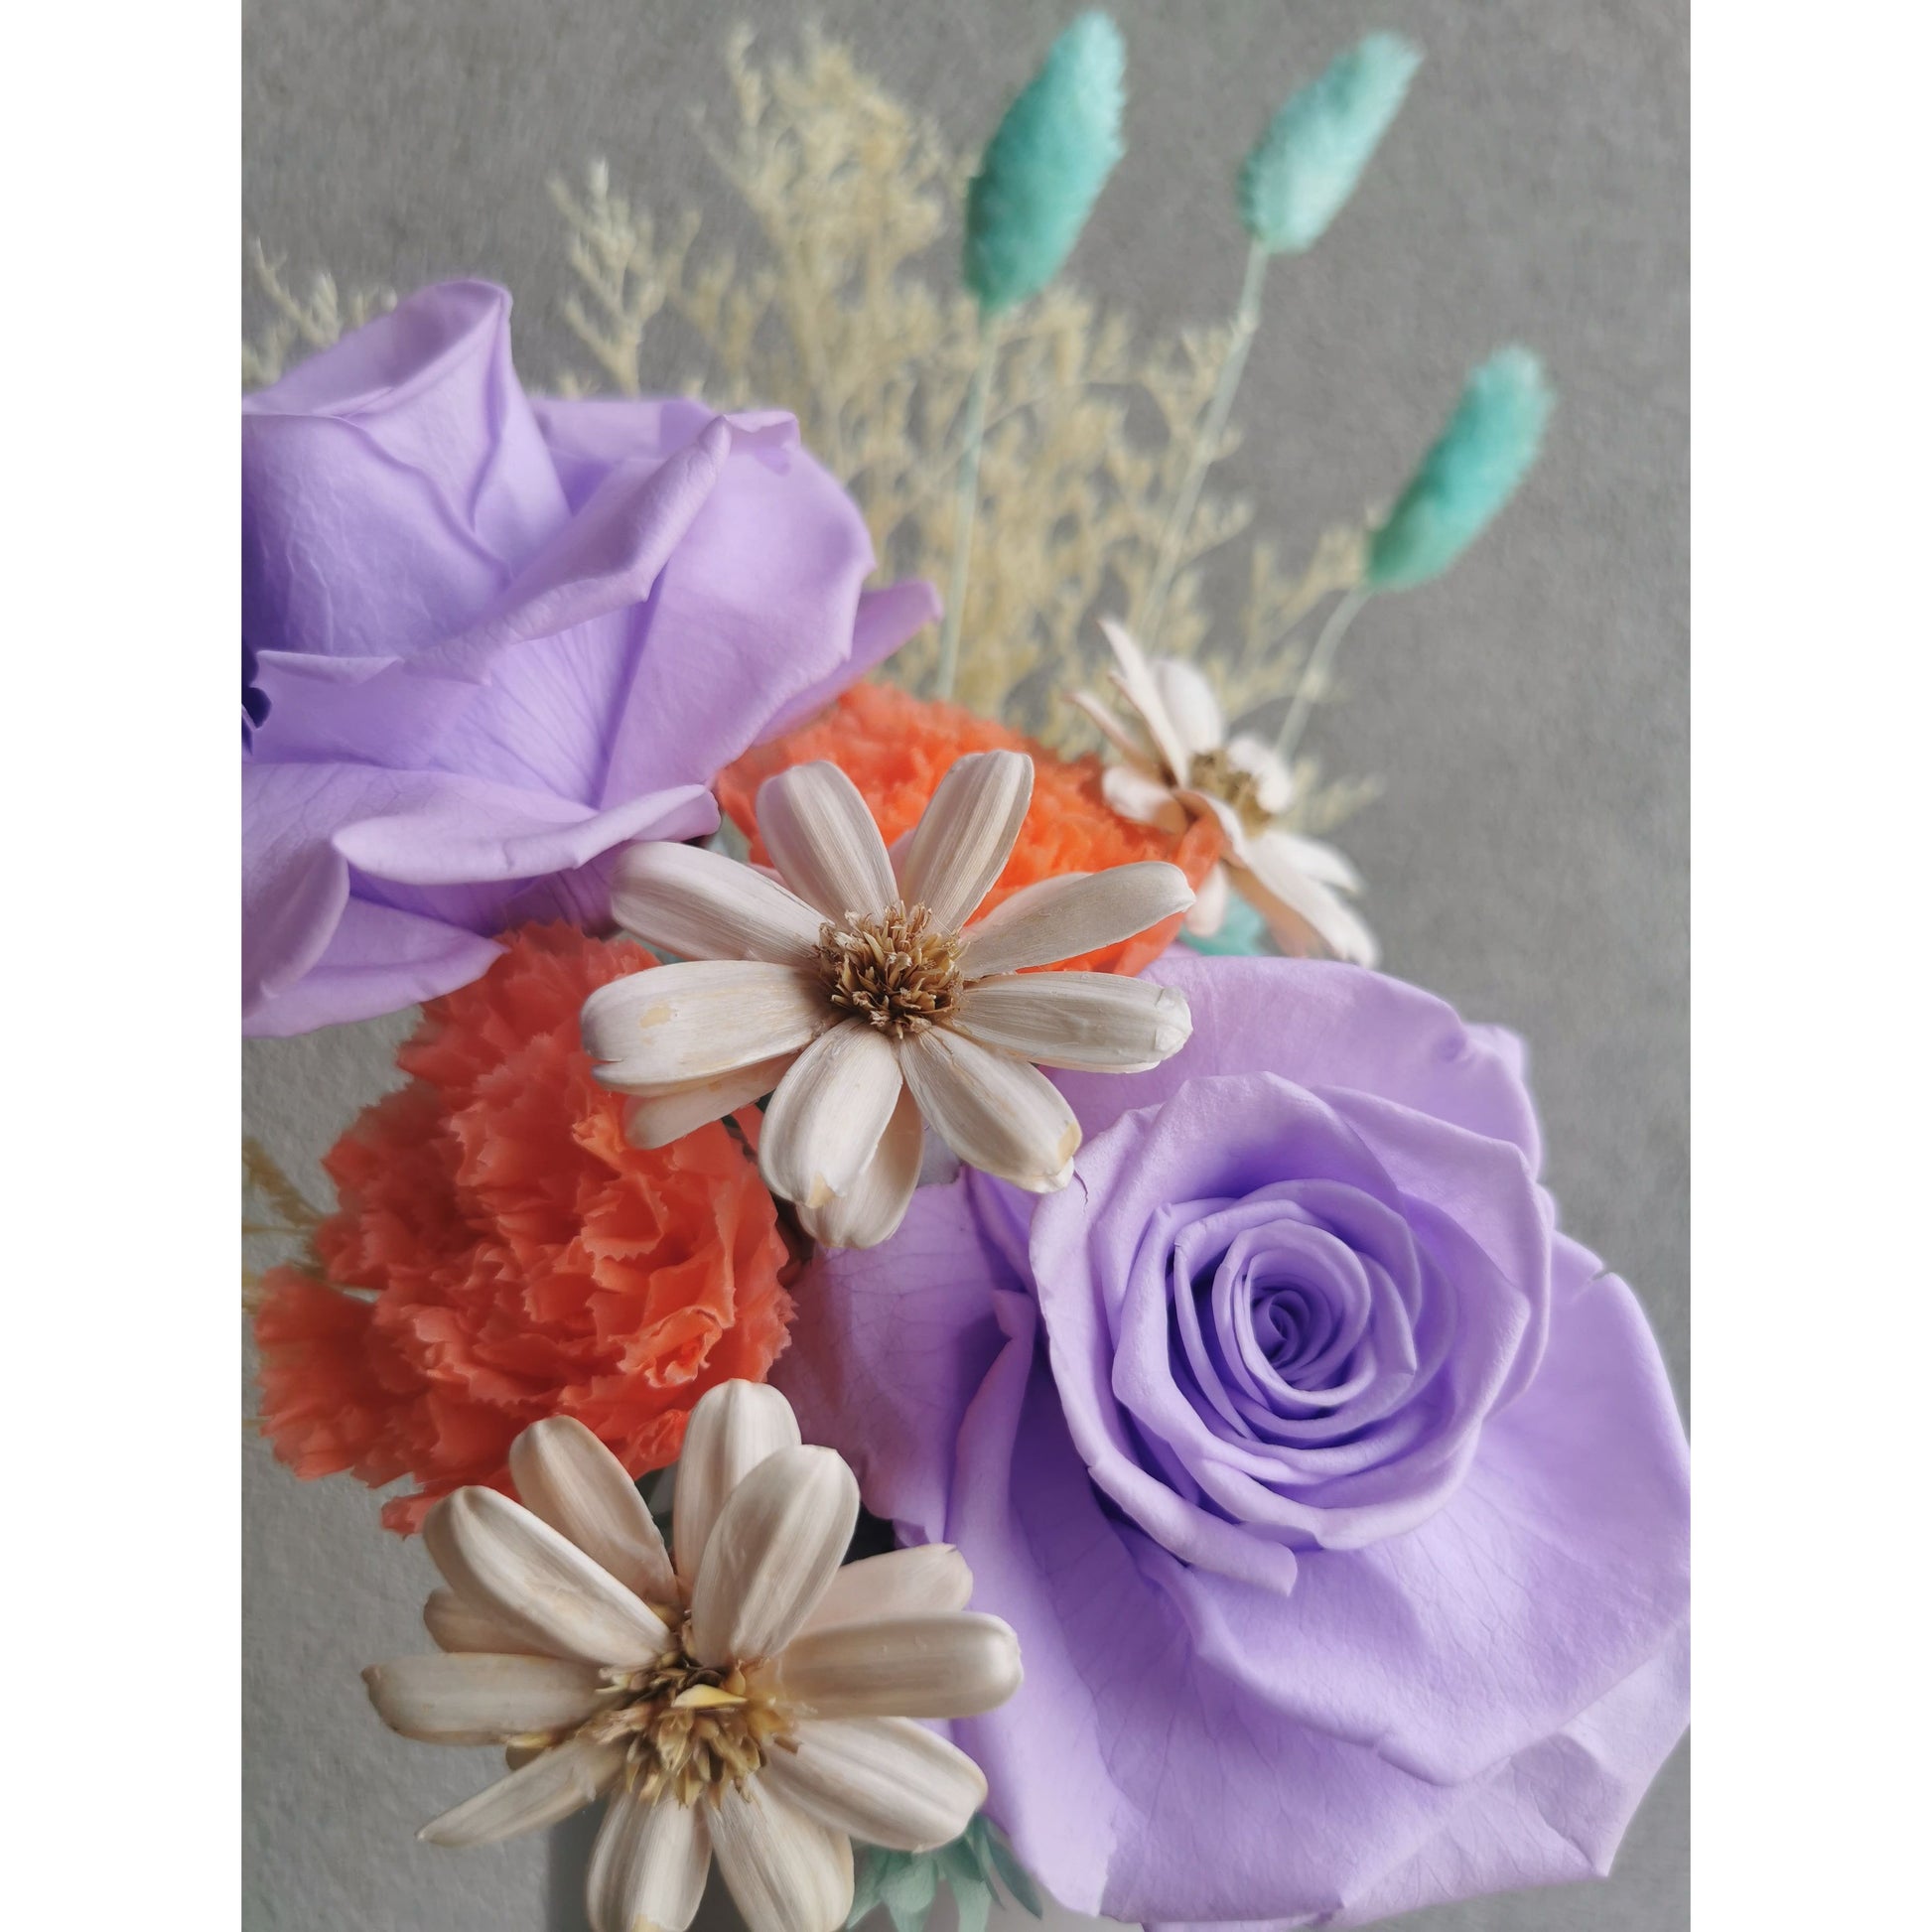 Dried & Preserved flower arrangement in purple, orange, white, blue & yellow. Featuring purple preserved roses and orange preserved carnations. Flowers are set in to a white pot. Photo shows a close up photo of the flowers